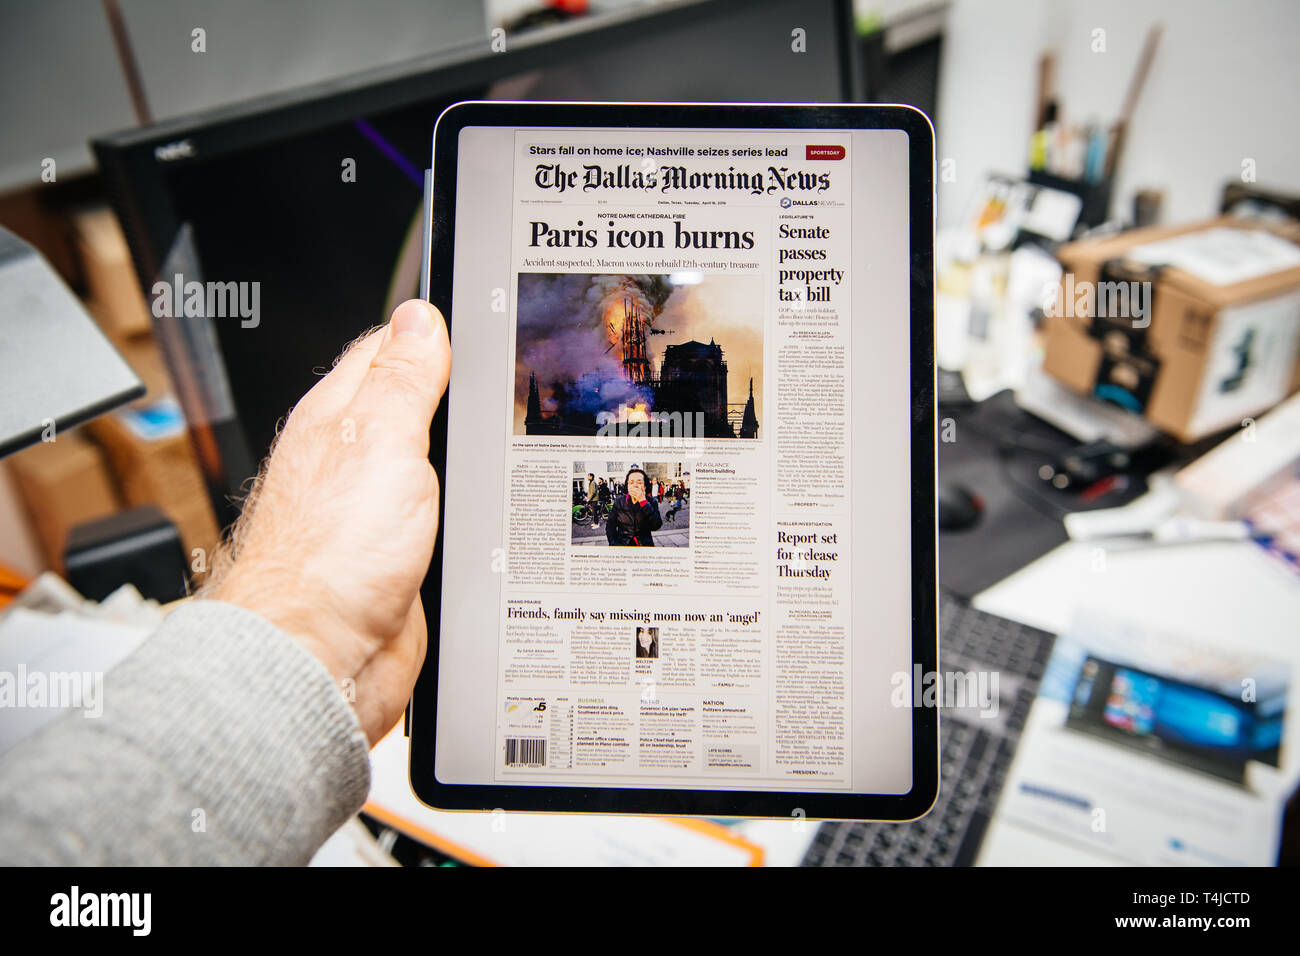 Paris, France - Apr 15, 2019: Man reading THe Dallas Morning News on iPad Pro Apple News Plus digital newspaper featuring on cover Notre-Dame Cathedral on fire causing damages the famous spire to collapse Stock Photo